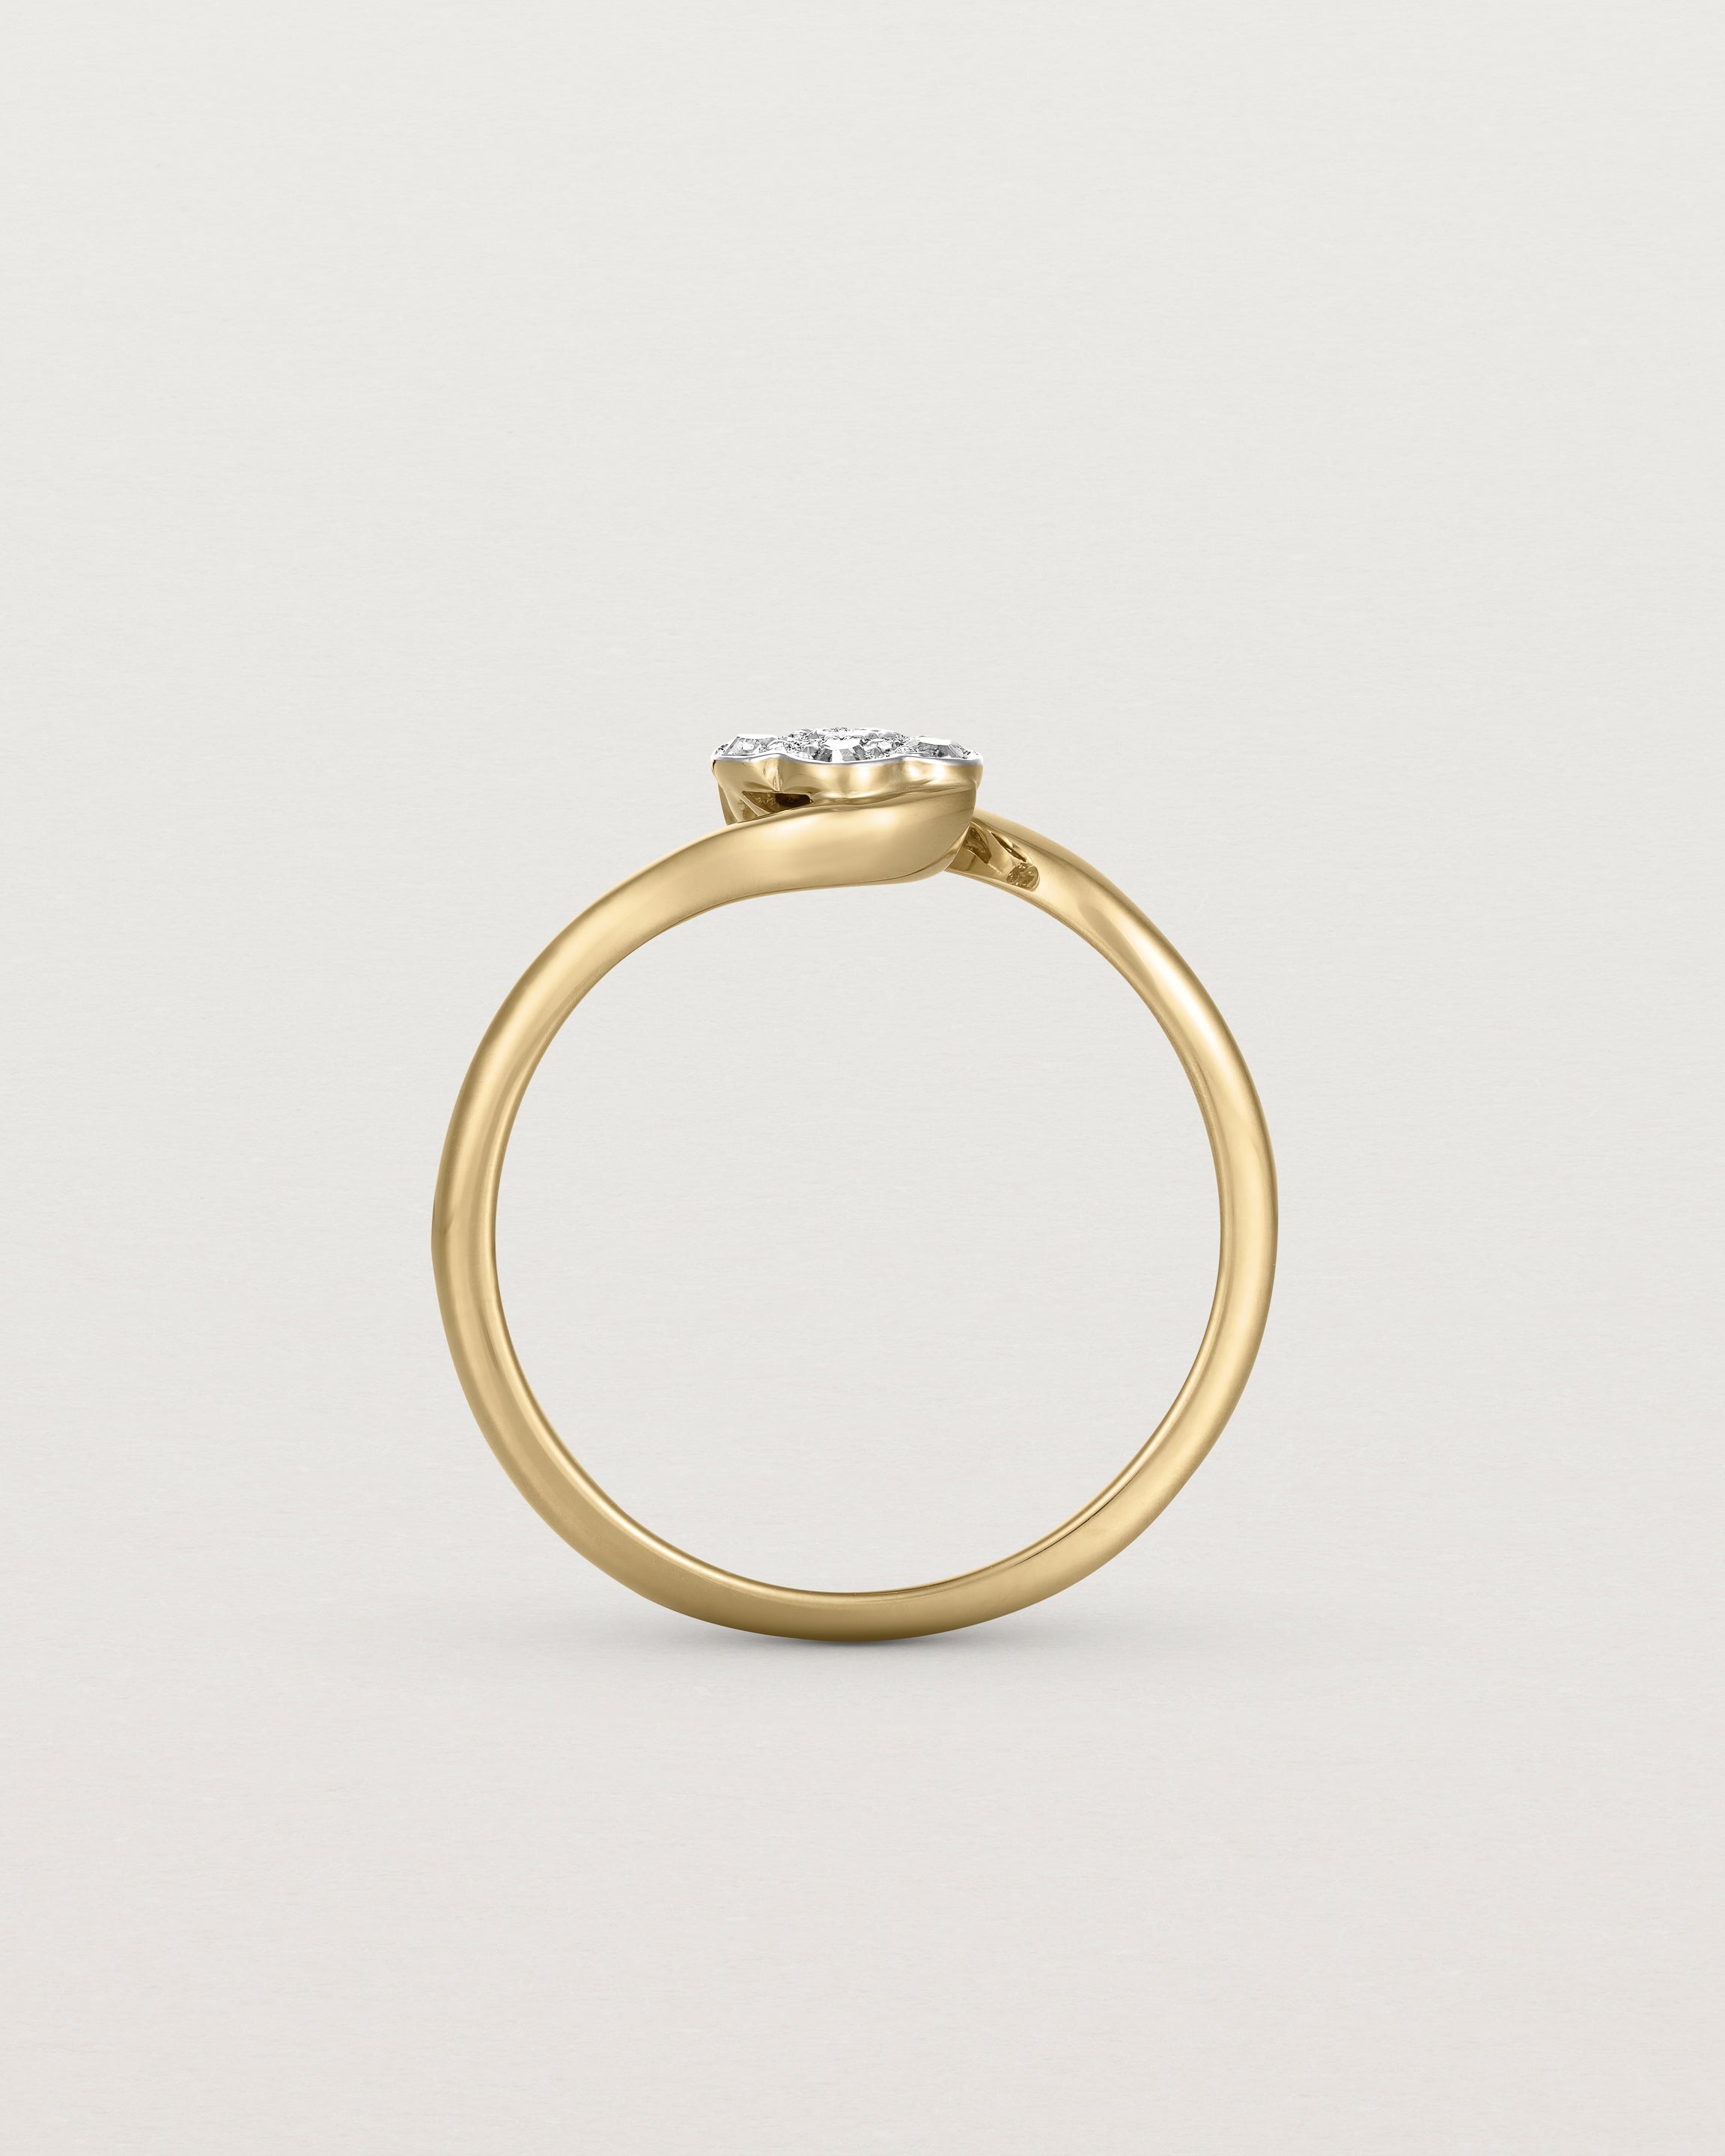 Standing view of the Phoebe Vintage Ring | Diamonds.